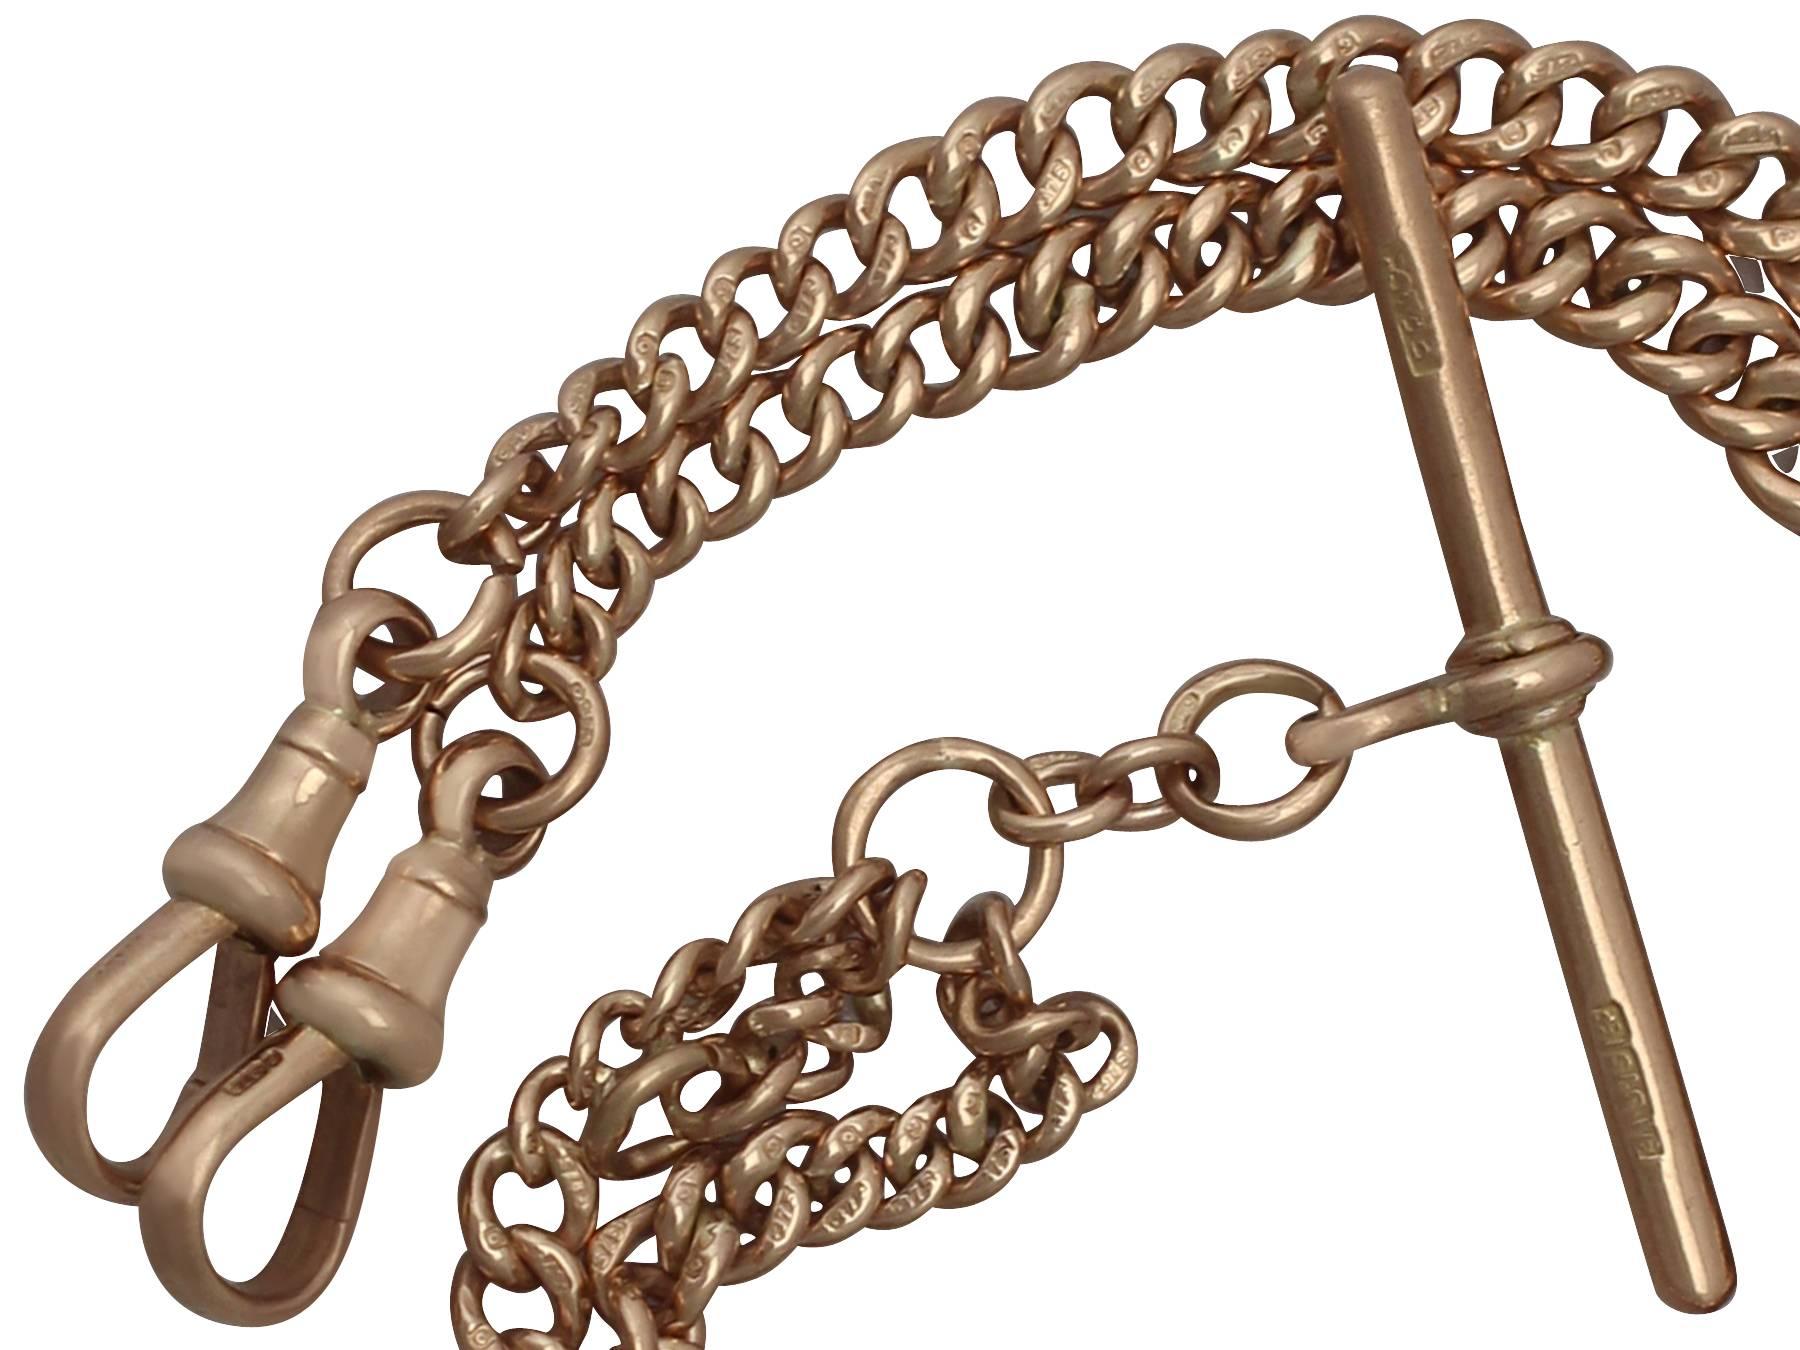 A fine and impressive antique 9k yellow gold double Albert watch chain; part of our antique jewellery and estate jewelry collections

This fine and impressive antique watch chain has been crafted in 9k yellow gold.

The rounded curb links that